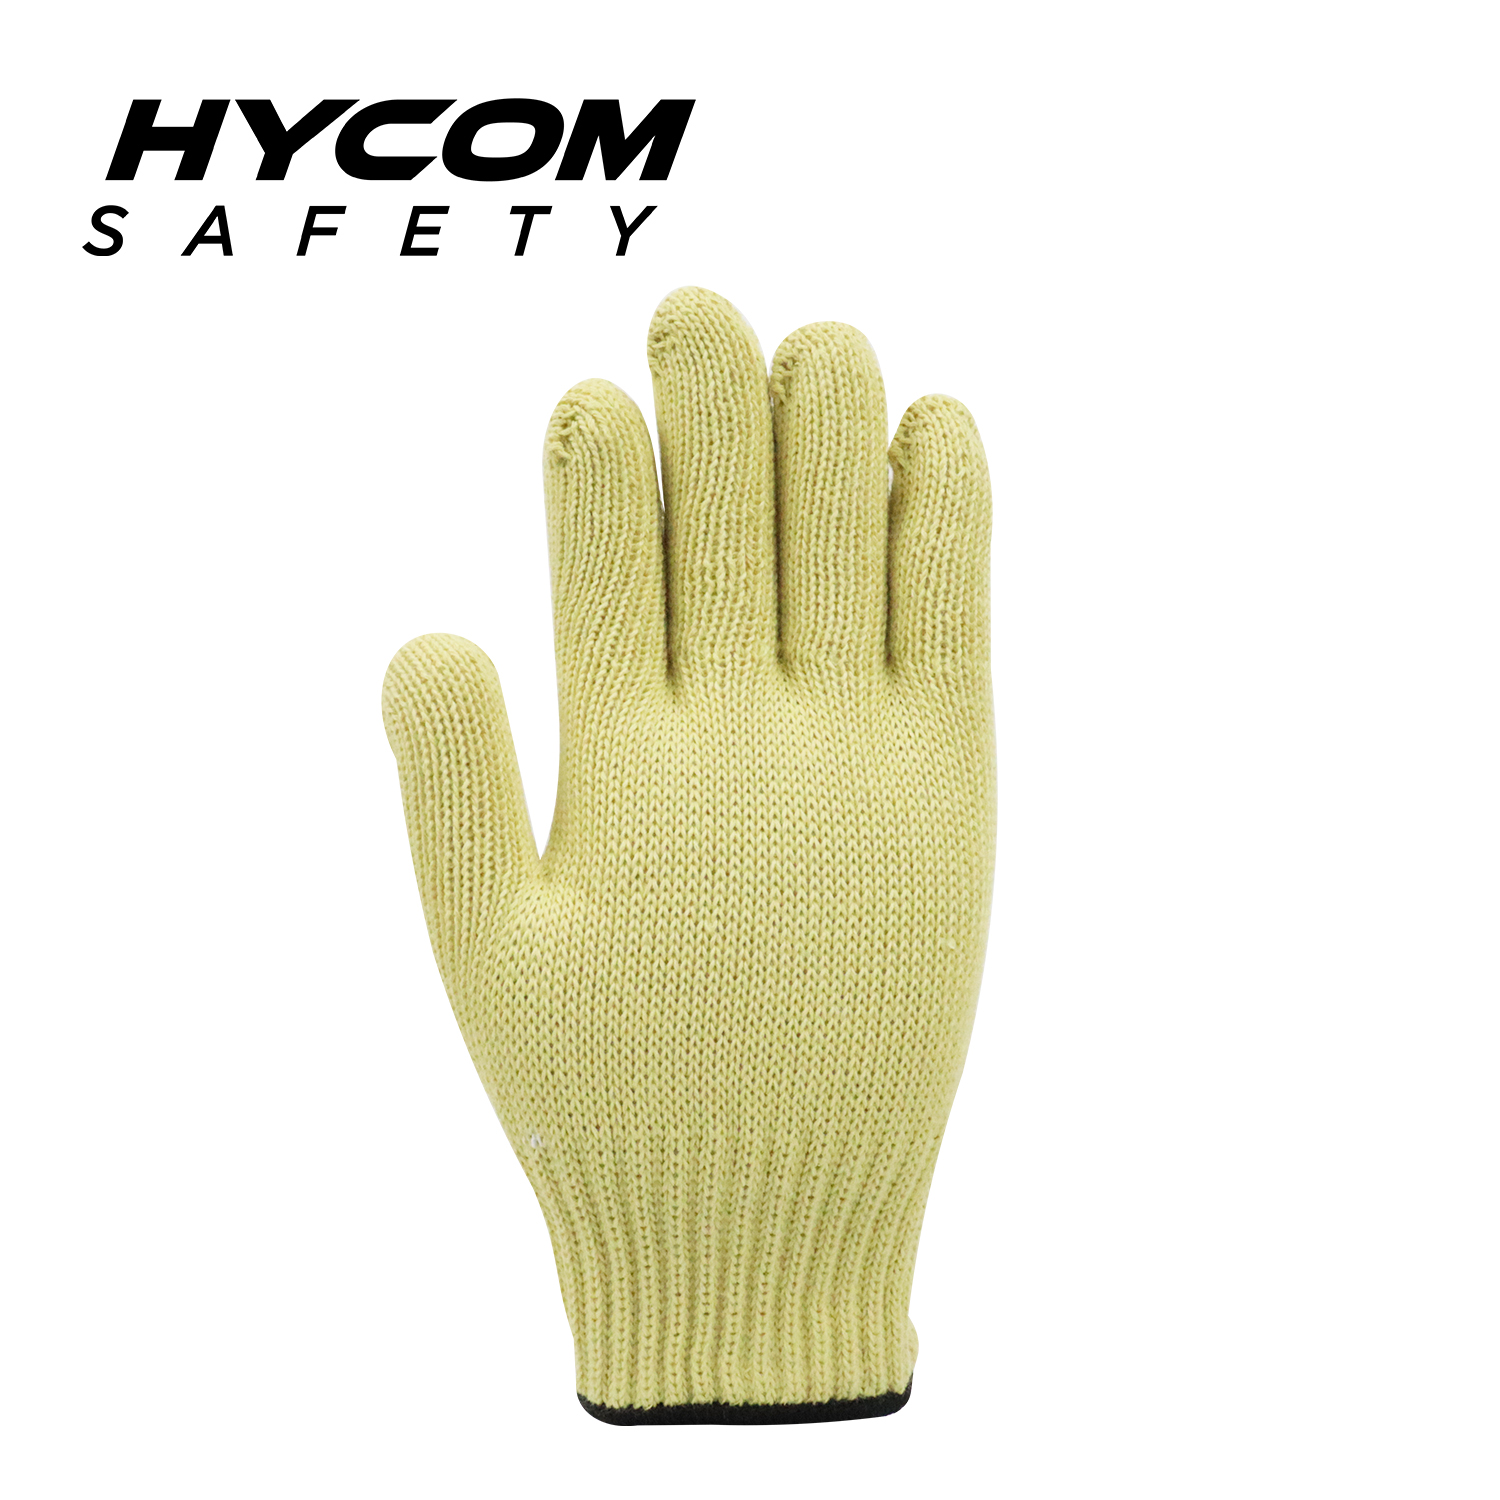 HYCOM 7G Two Layers Aramid Glove with Contact High Temperature 350°C/650F